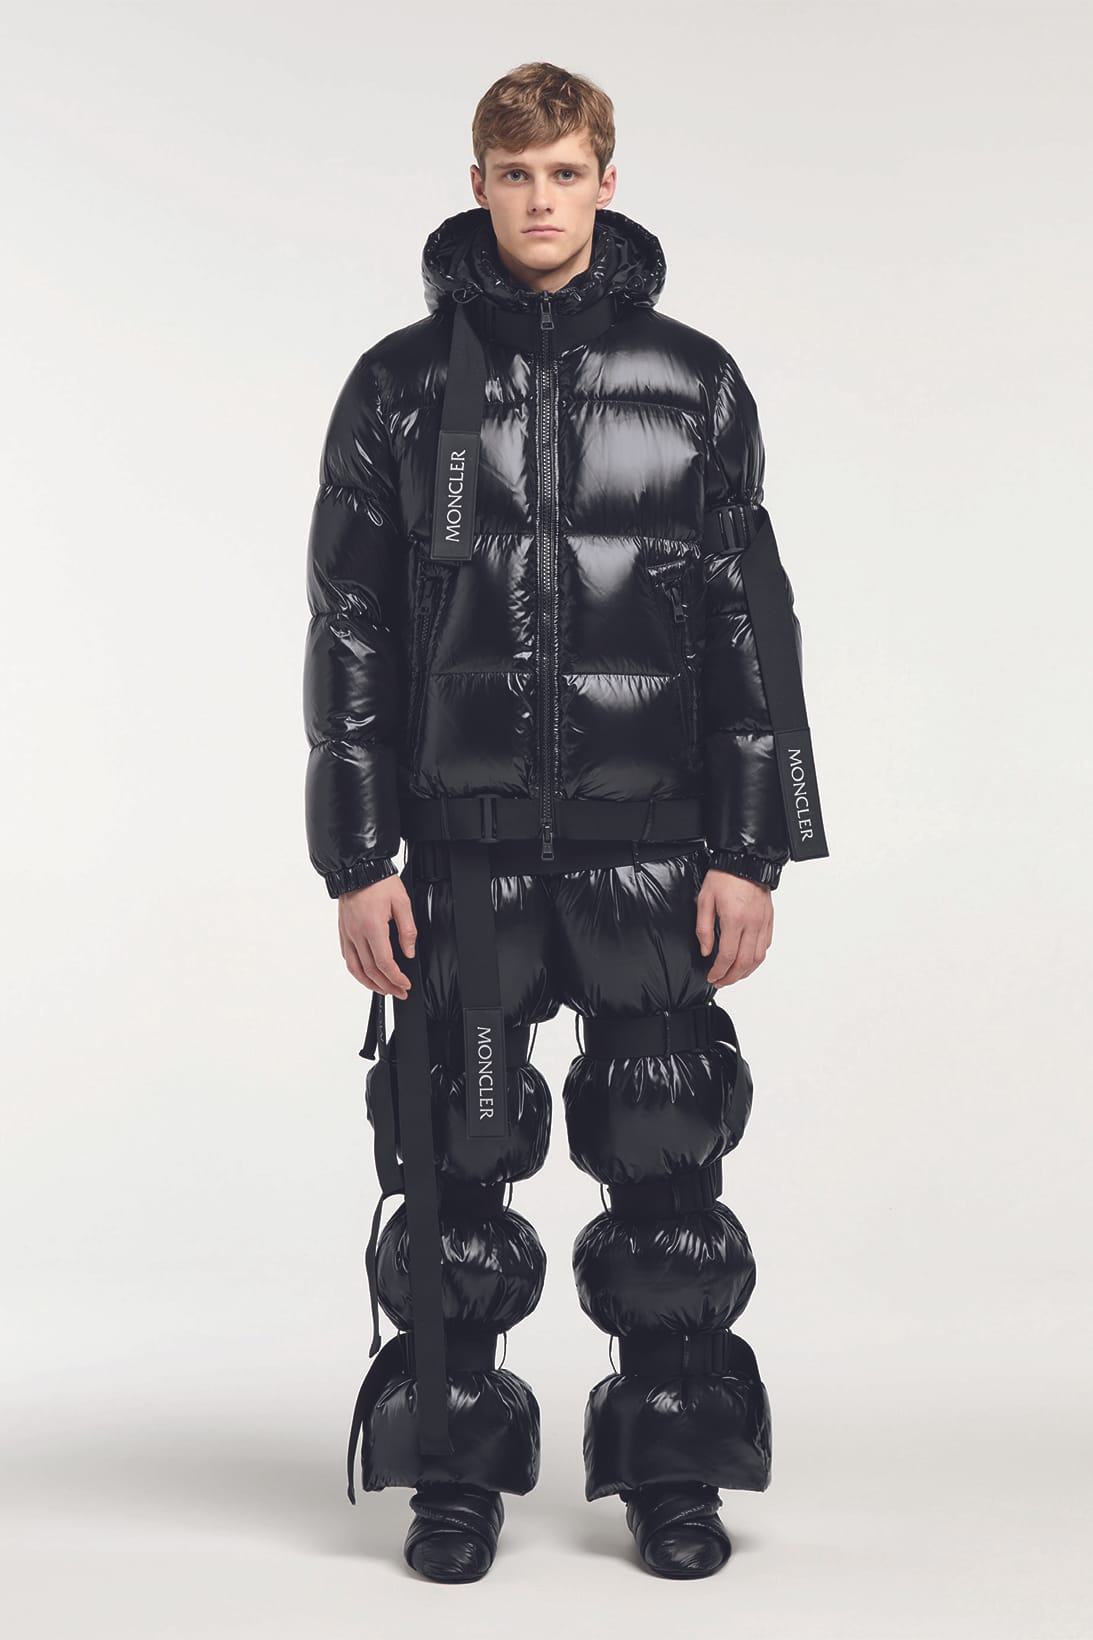 Moncler C by Craig Green Collection 